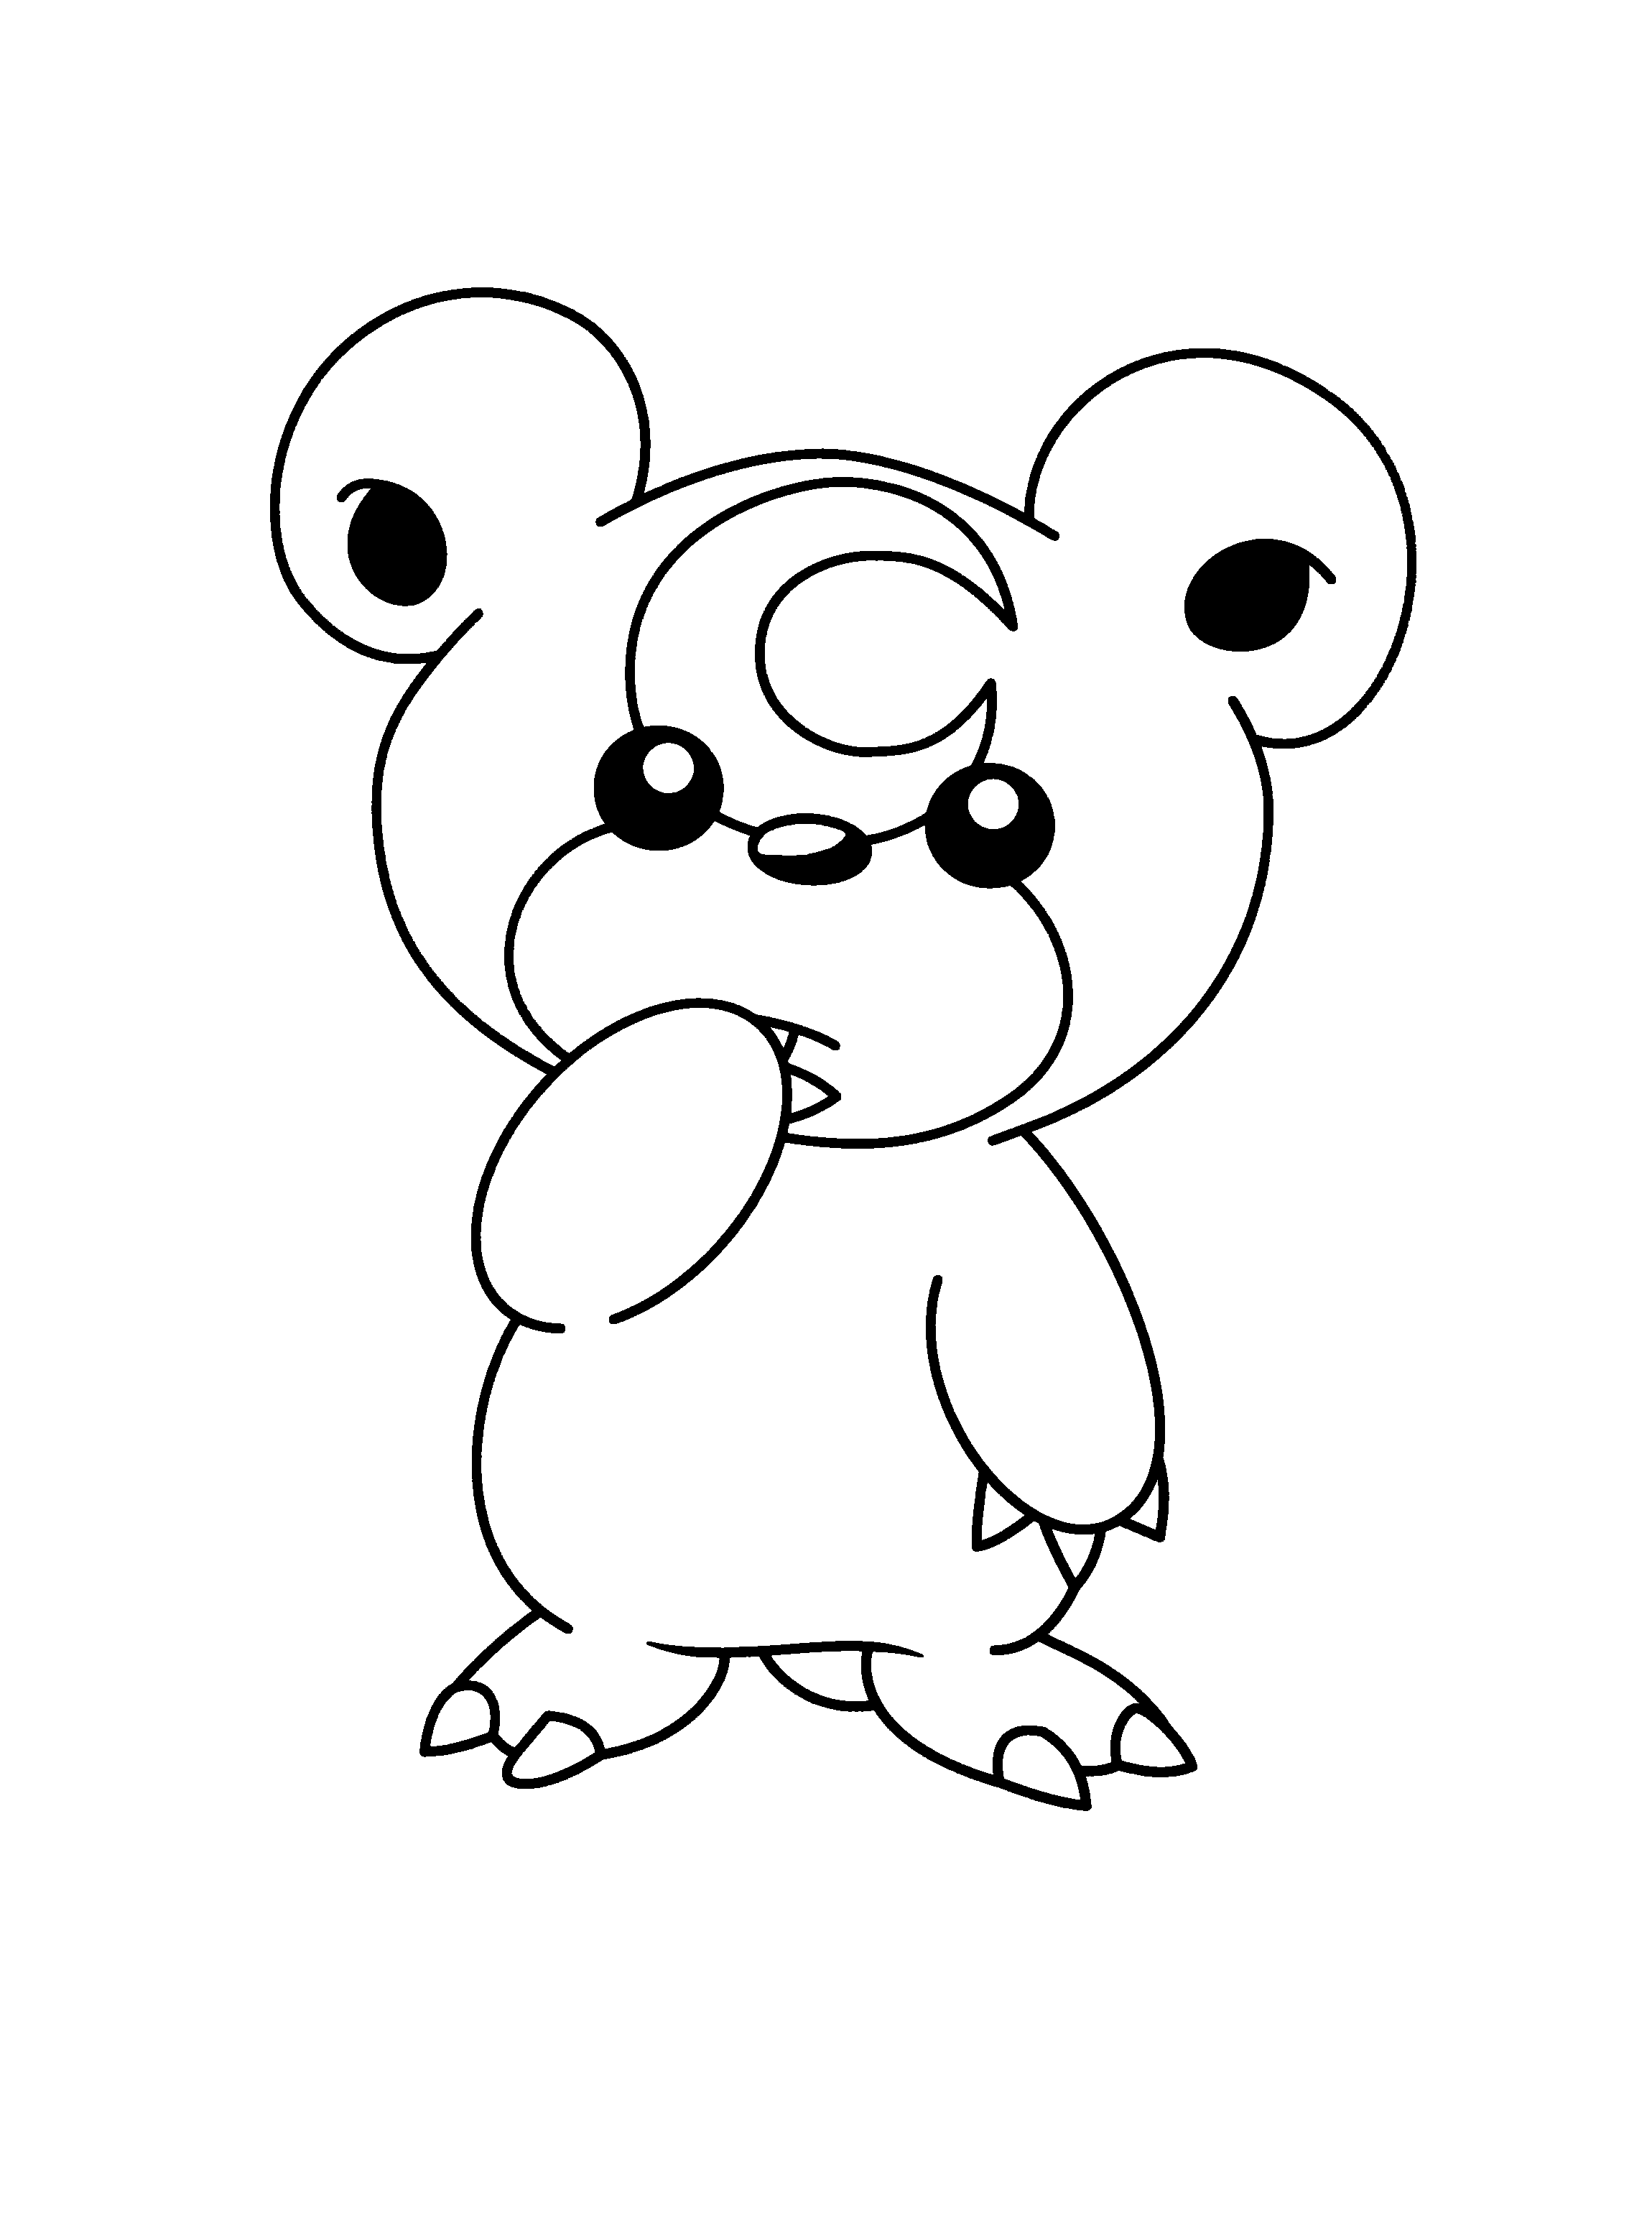 animated-coloring-pages-pokemon-image-0063